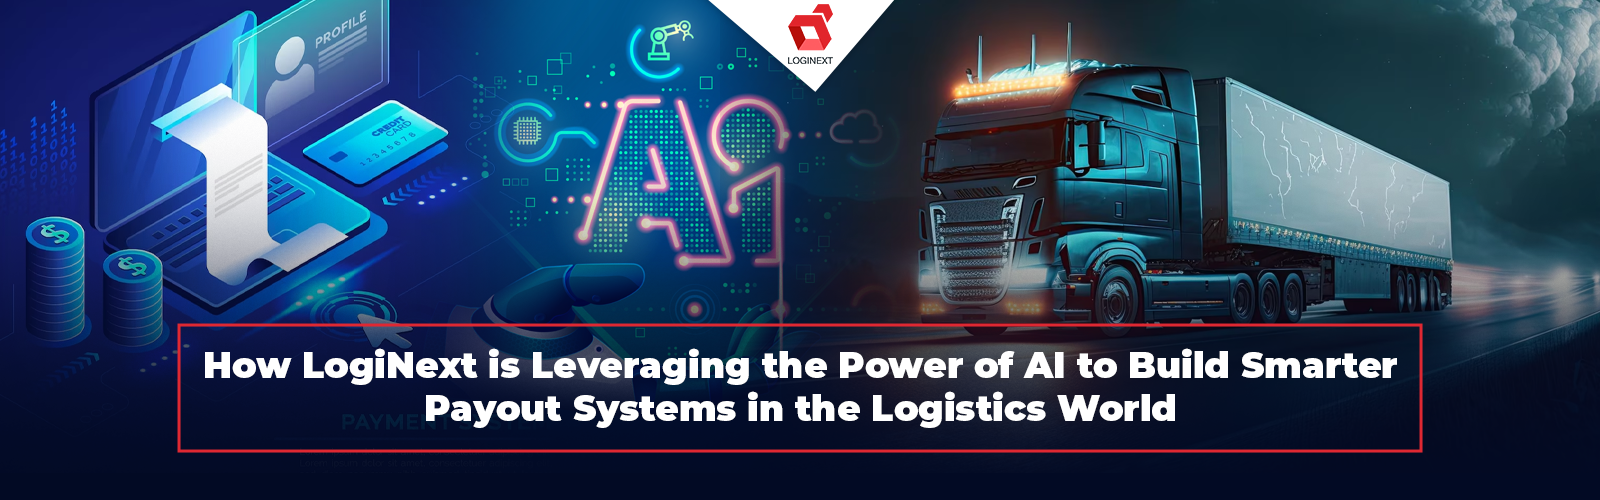 How LogiNext is Leveraging the Power of AI to Build Smarter Payout Systems in the Logistics World